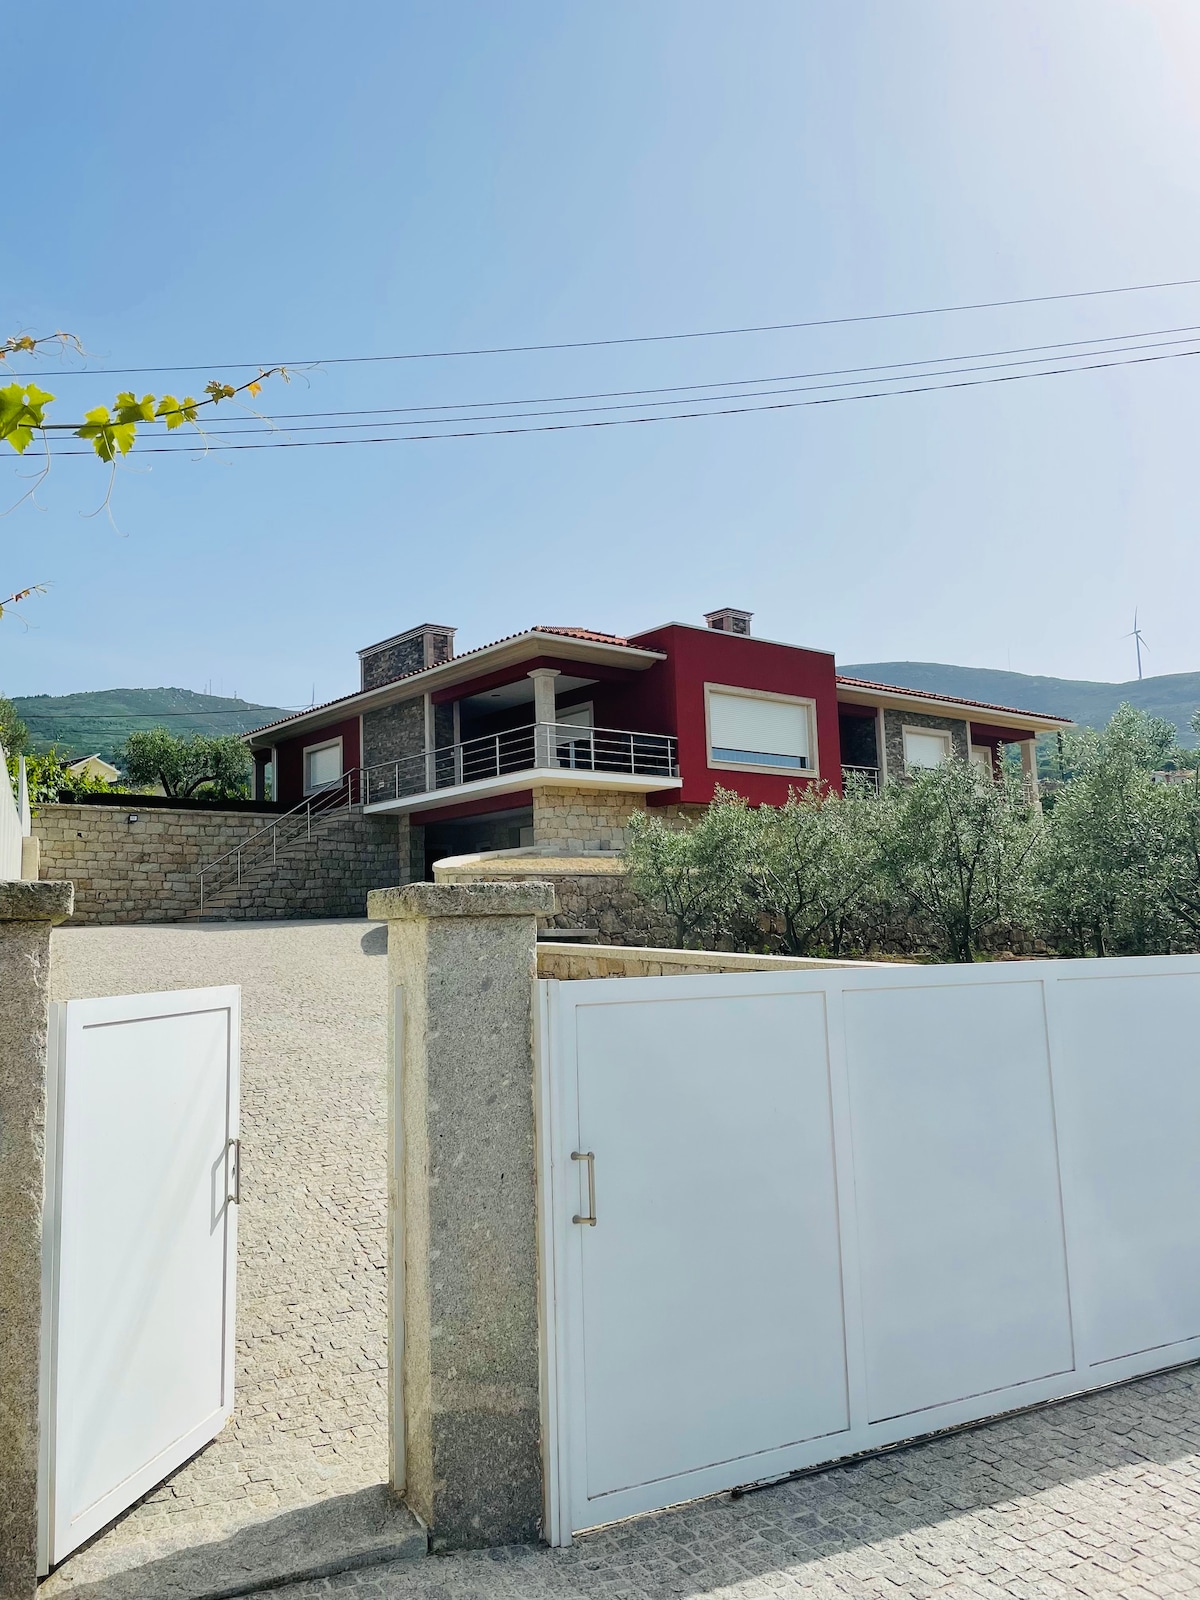 Villa RedHouse- DouroValley